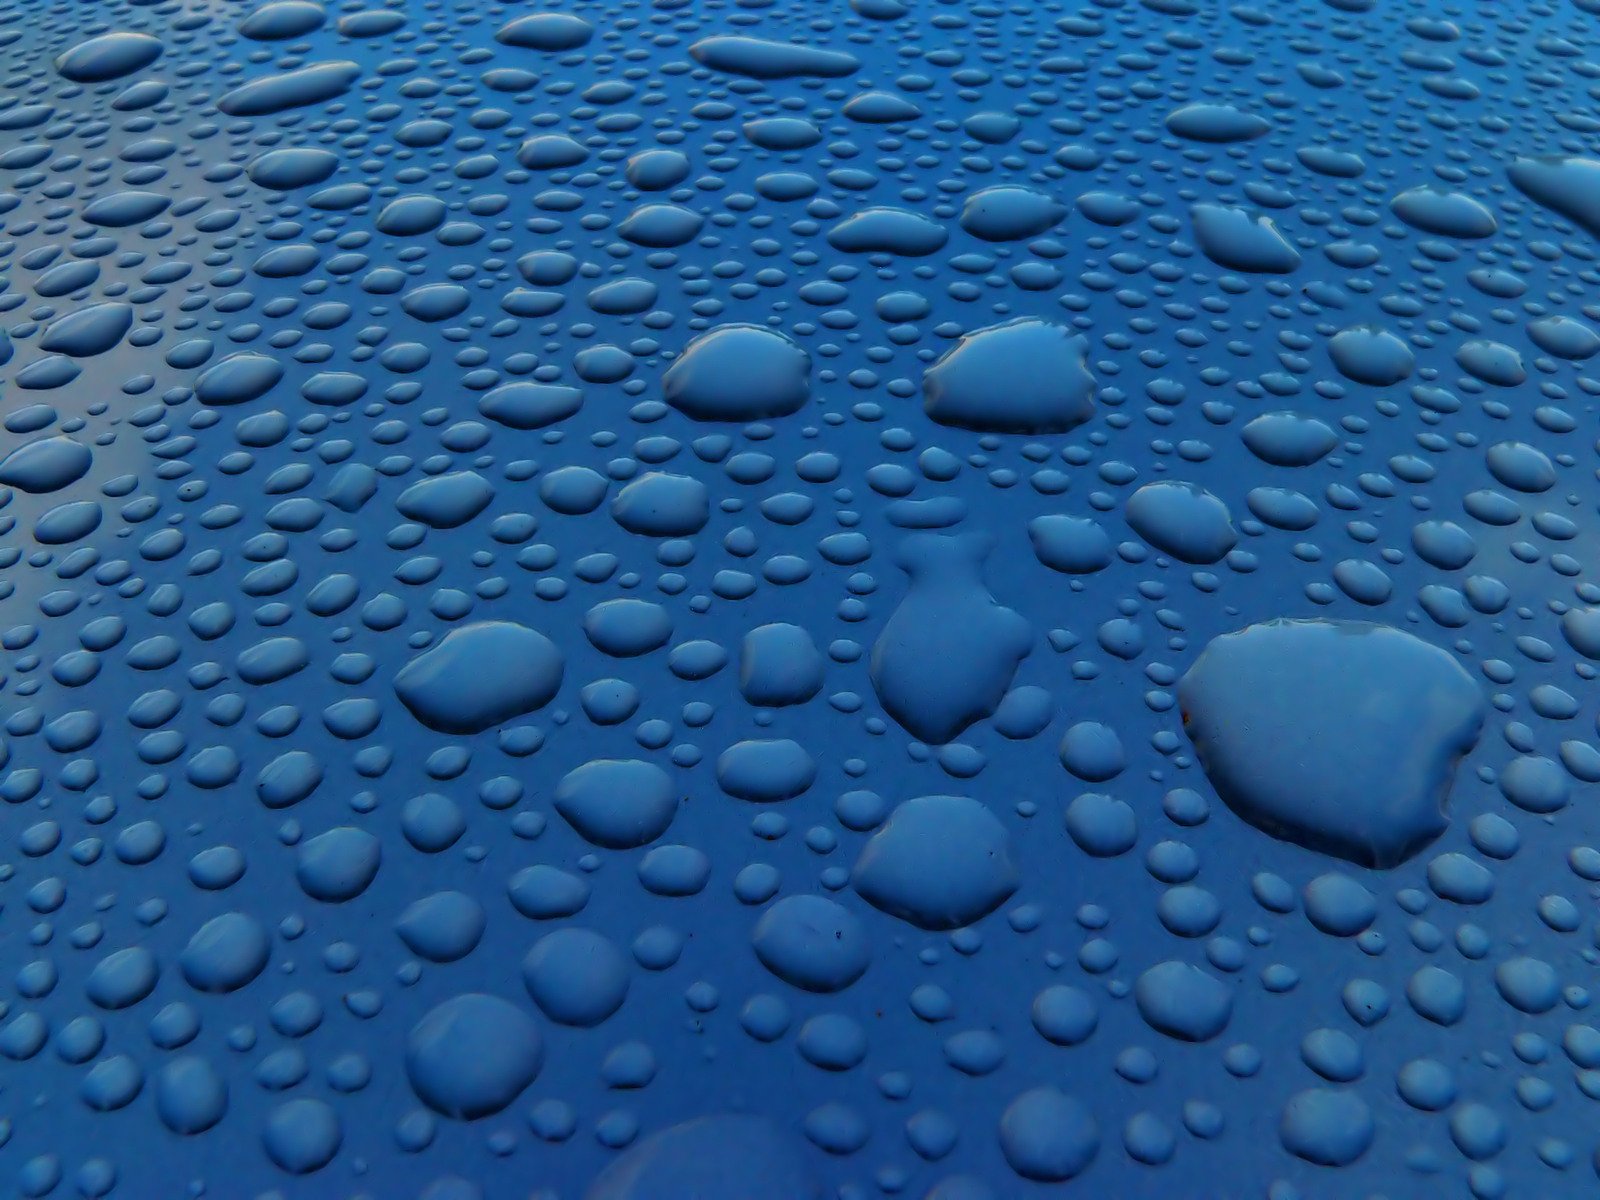 drops of water on a blue surface with different colors